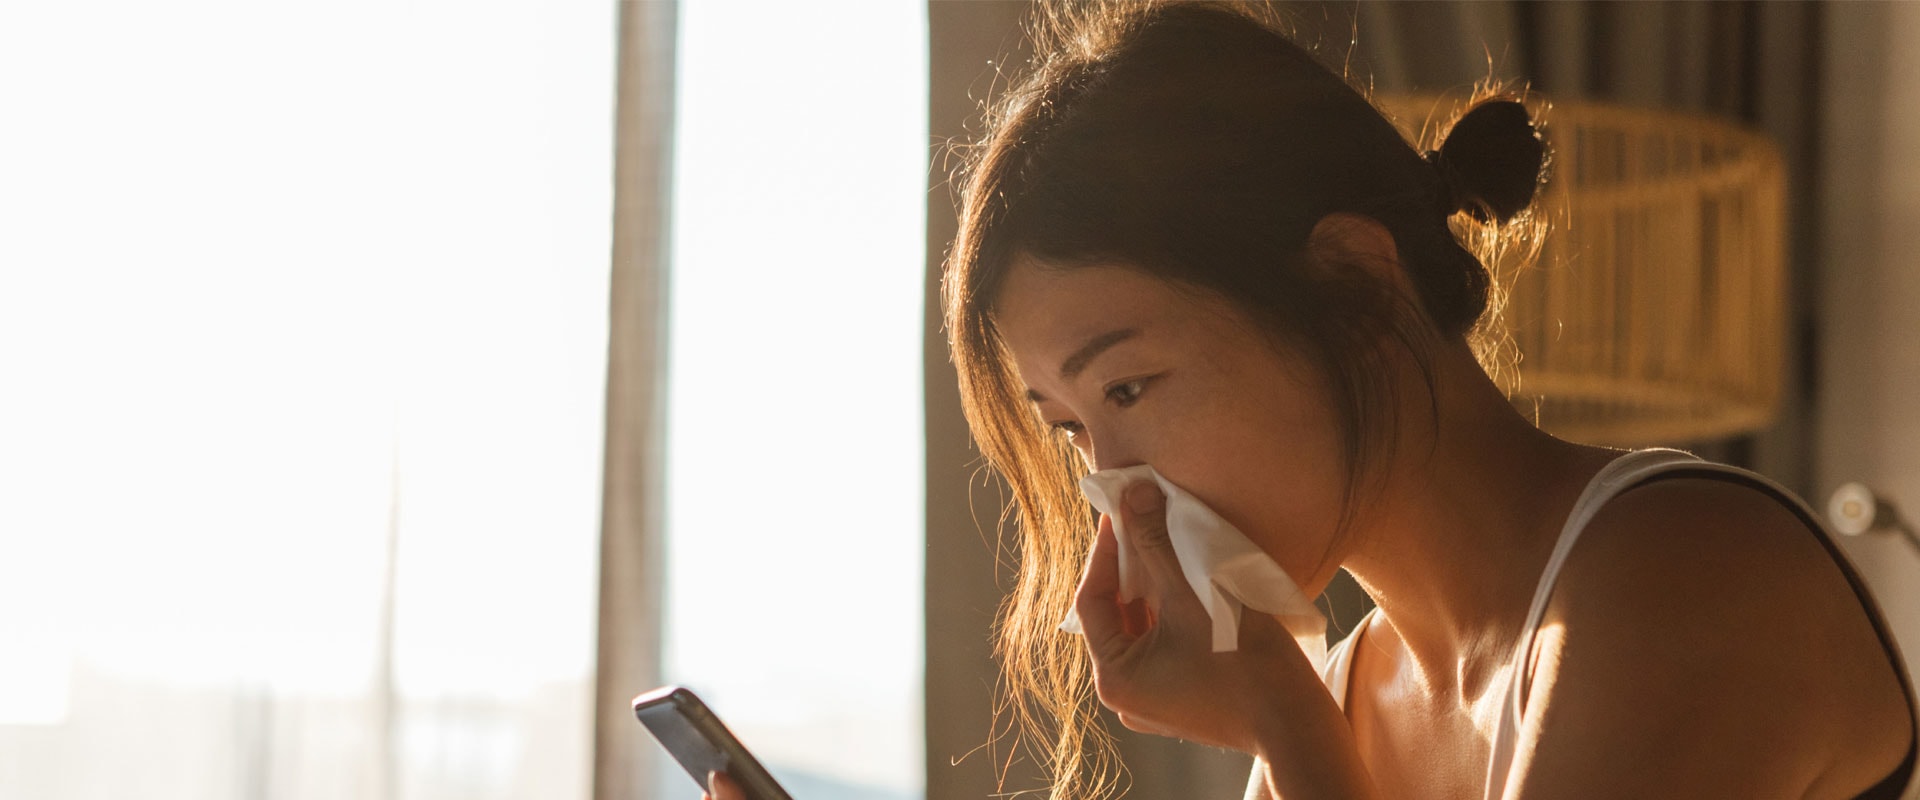 Do Air Purifiers Help with Allergies?